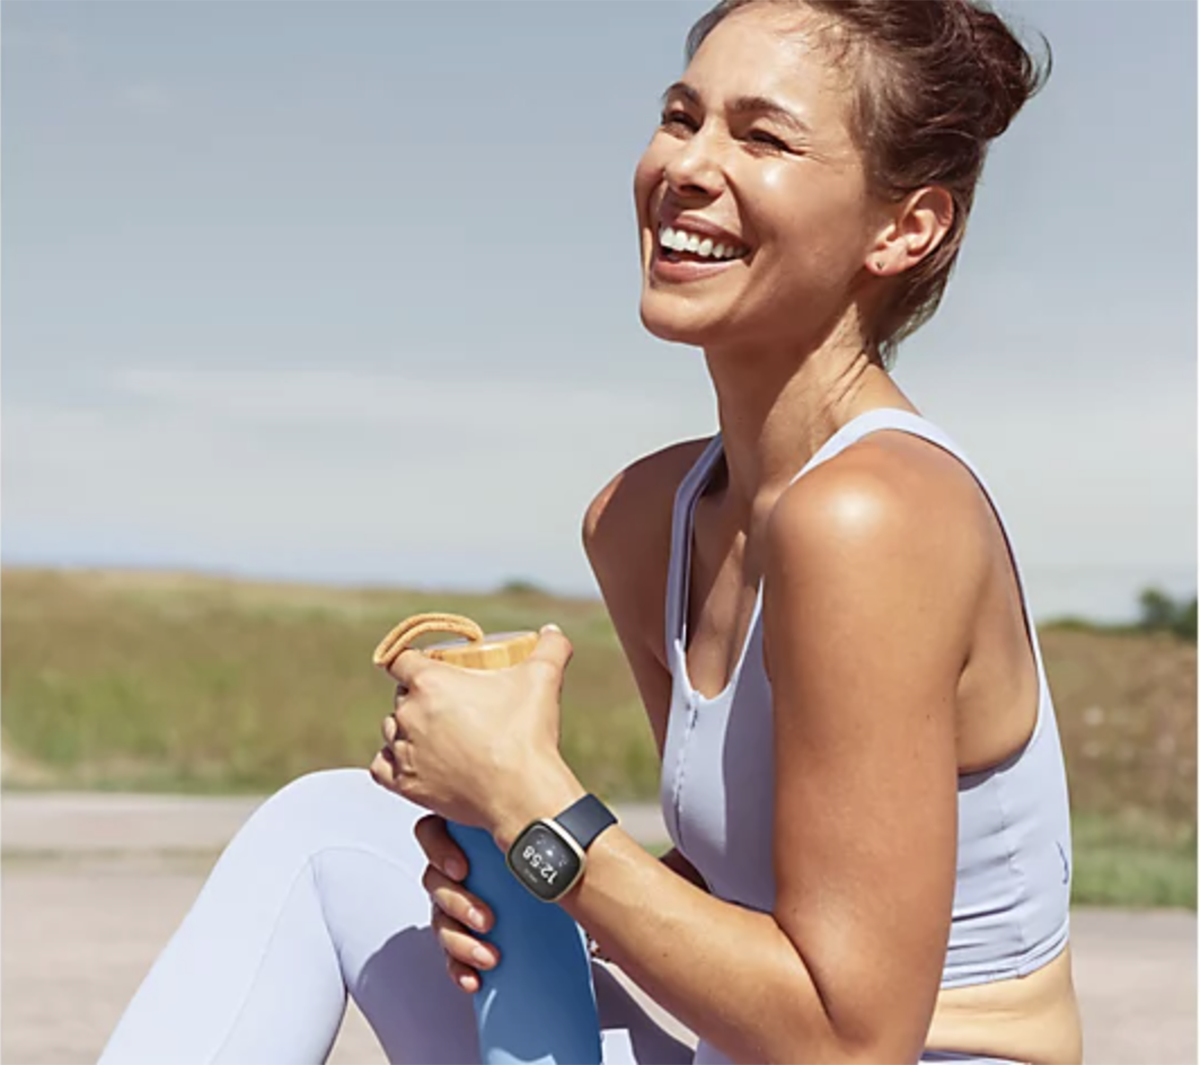 Fitbit Versa 3 on a woman in workout clothing.